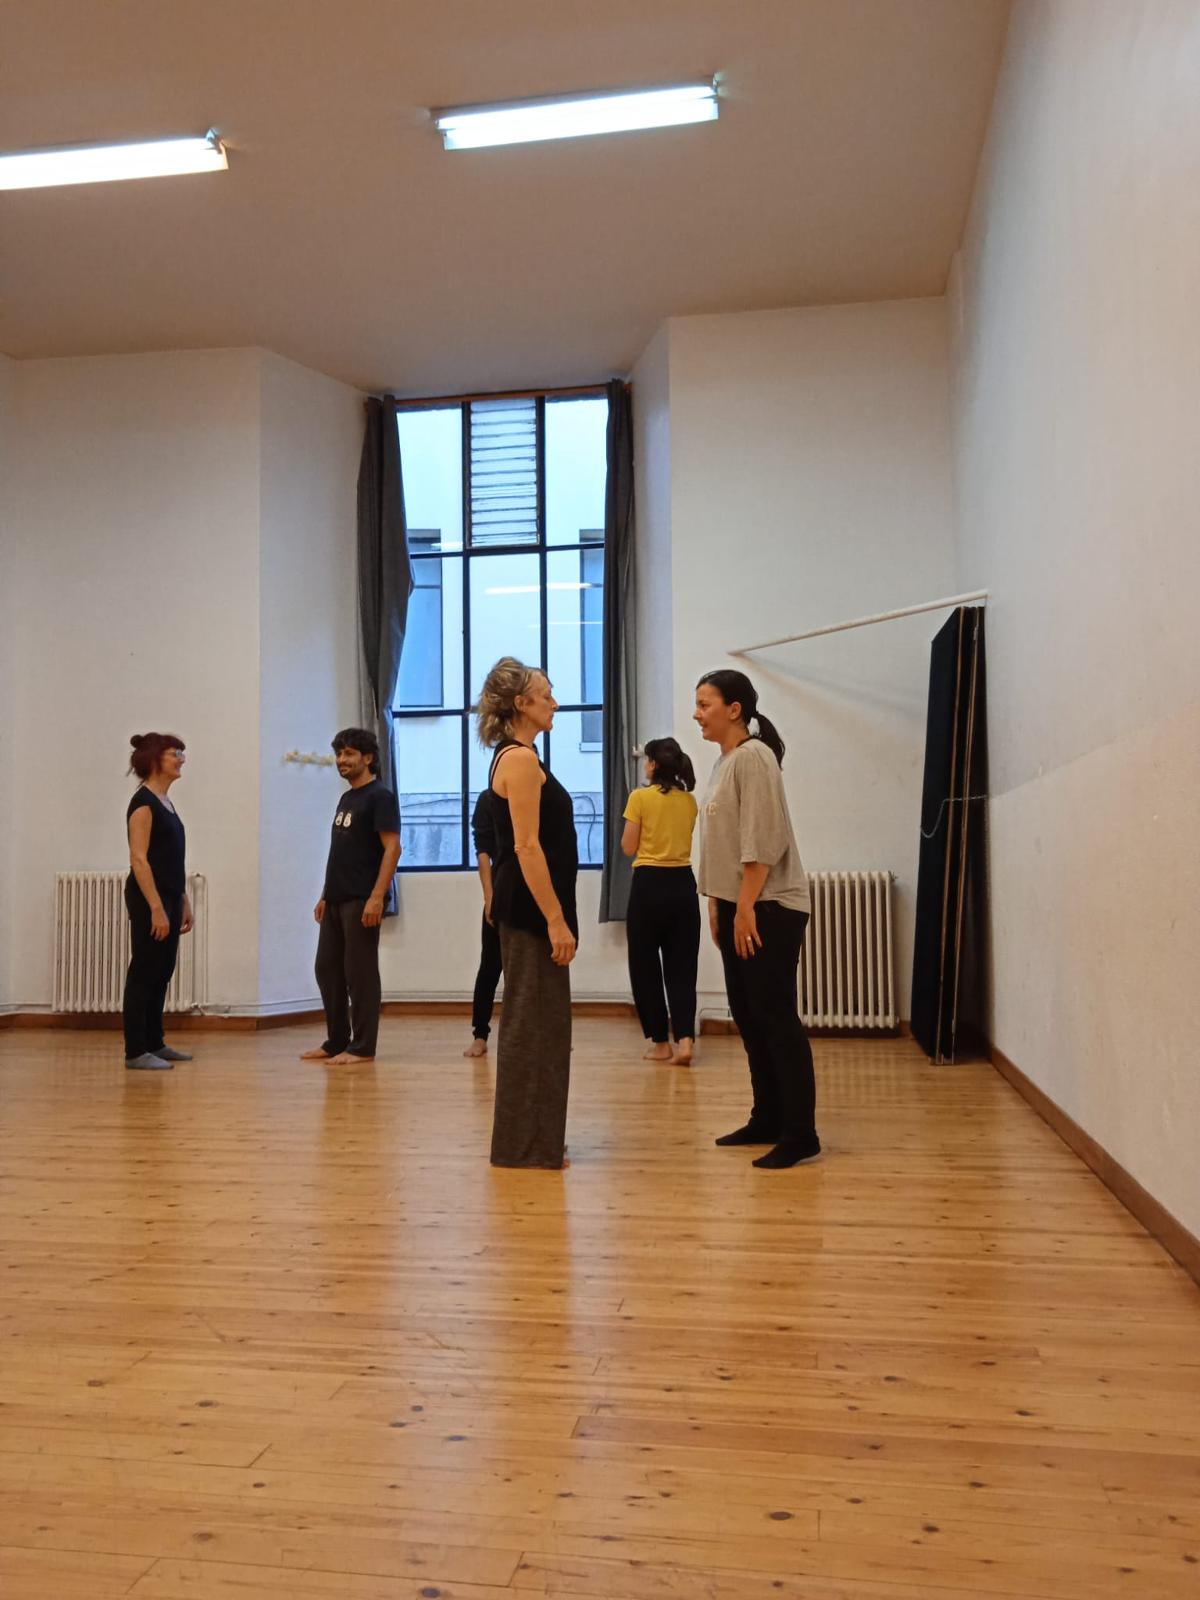 Physical theater and connections at El Galliner (Girona) with Emanuele Nargi